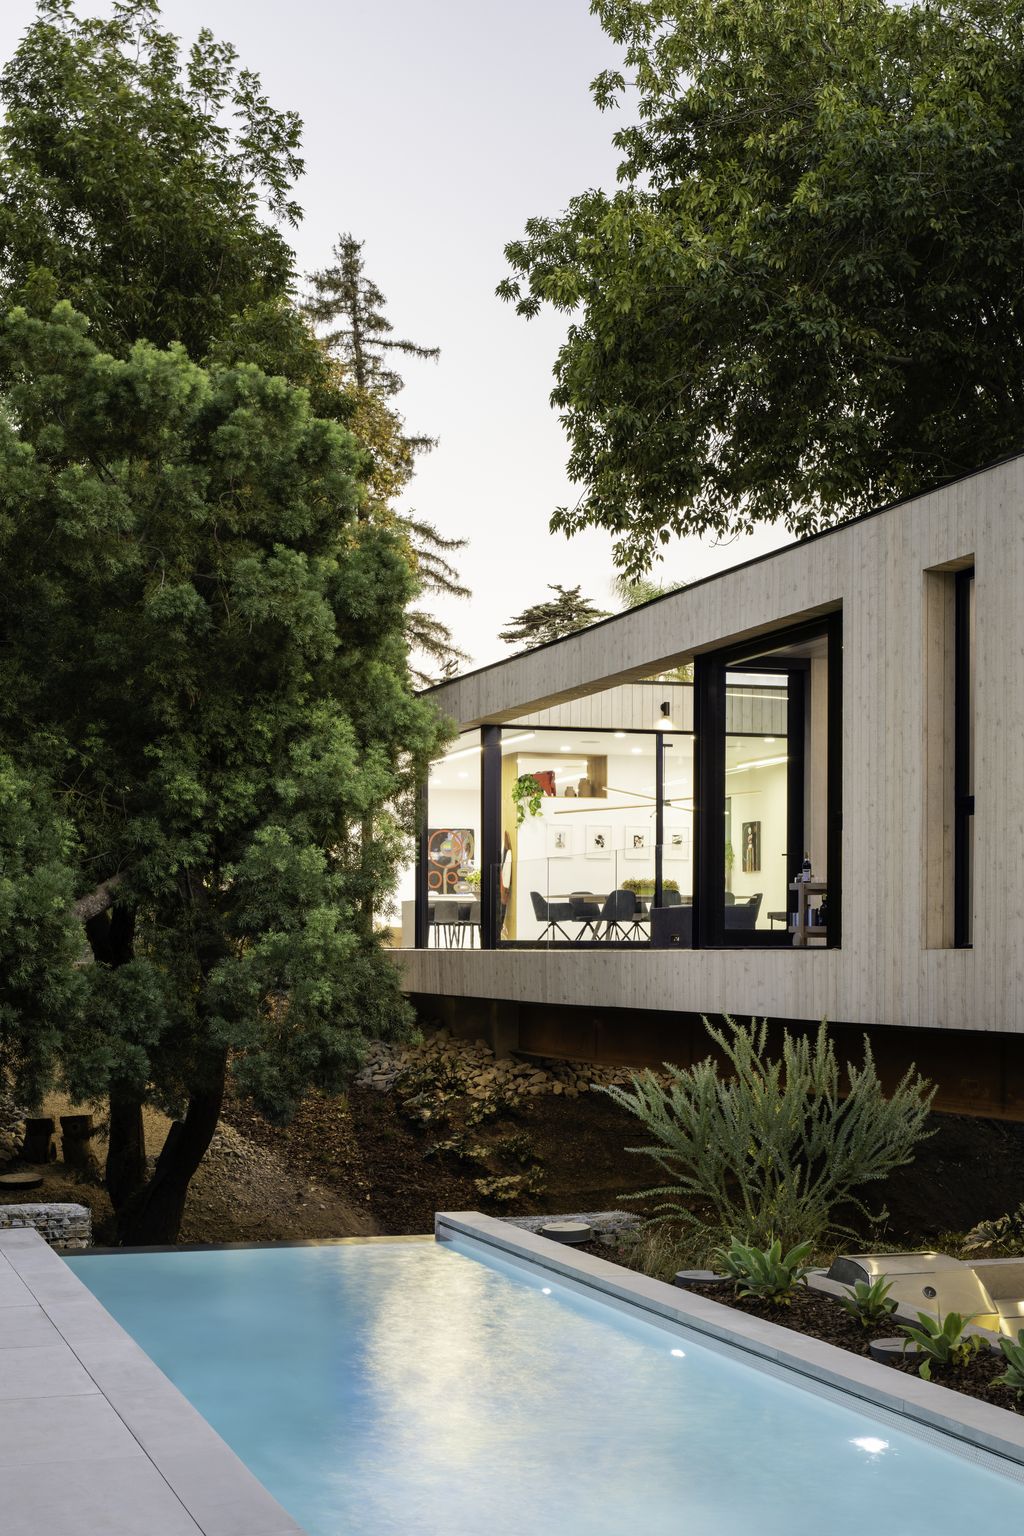 Bridge-House-Nestled-in-Nature-in-Los-Angeles-by-Dan-Brunn-Architecture-14